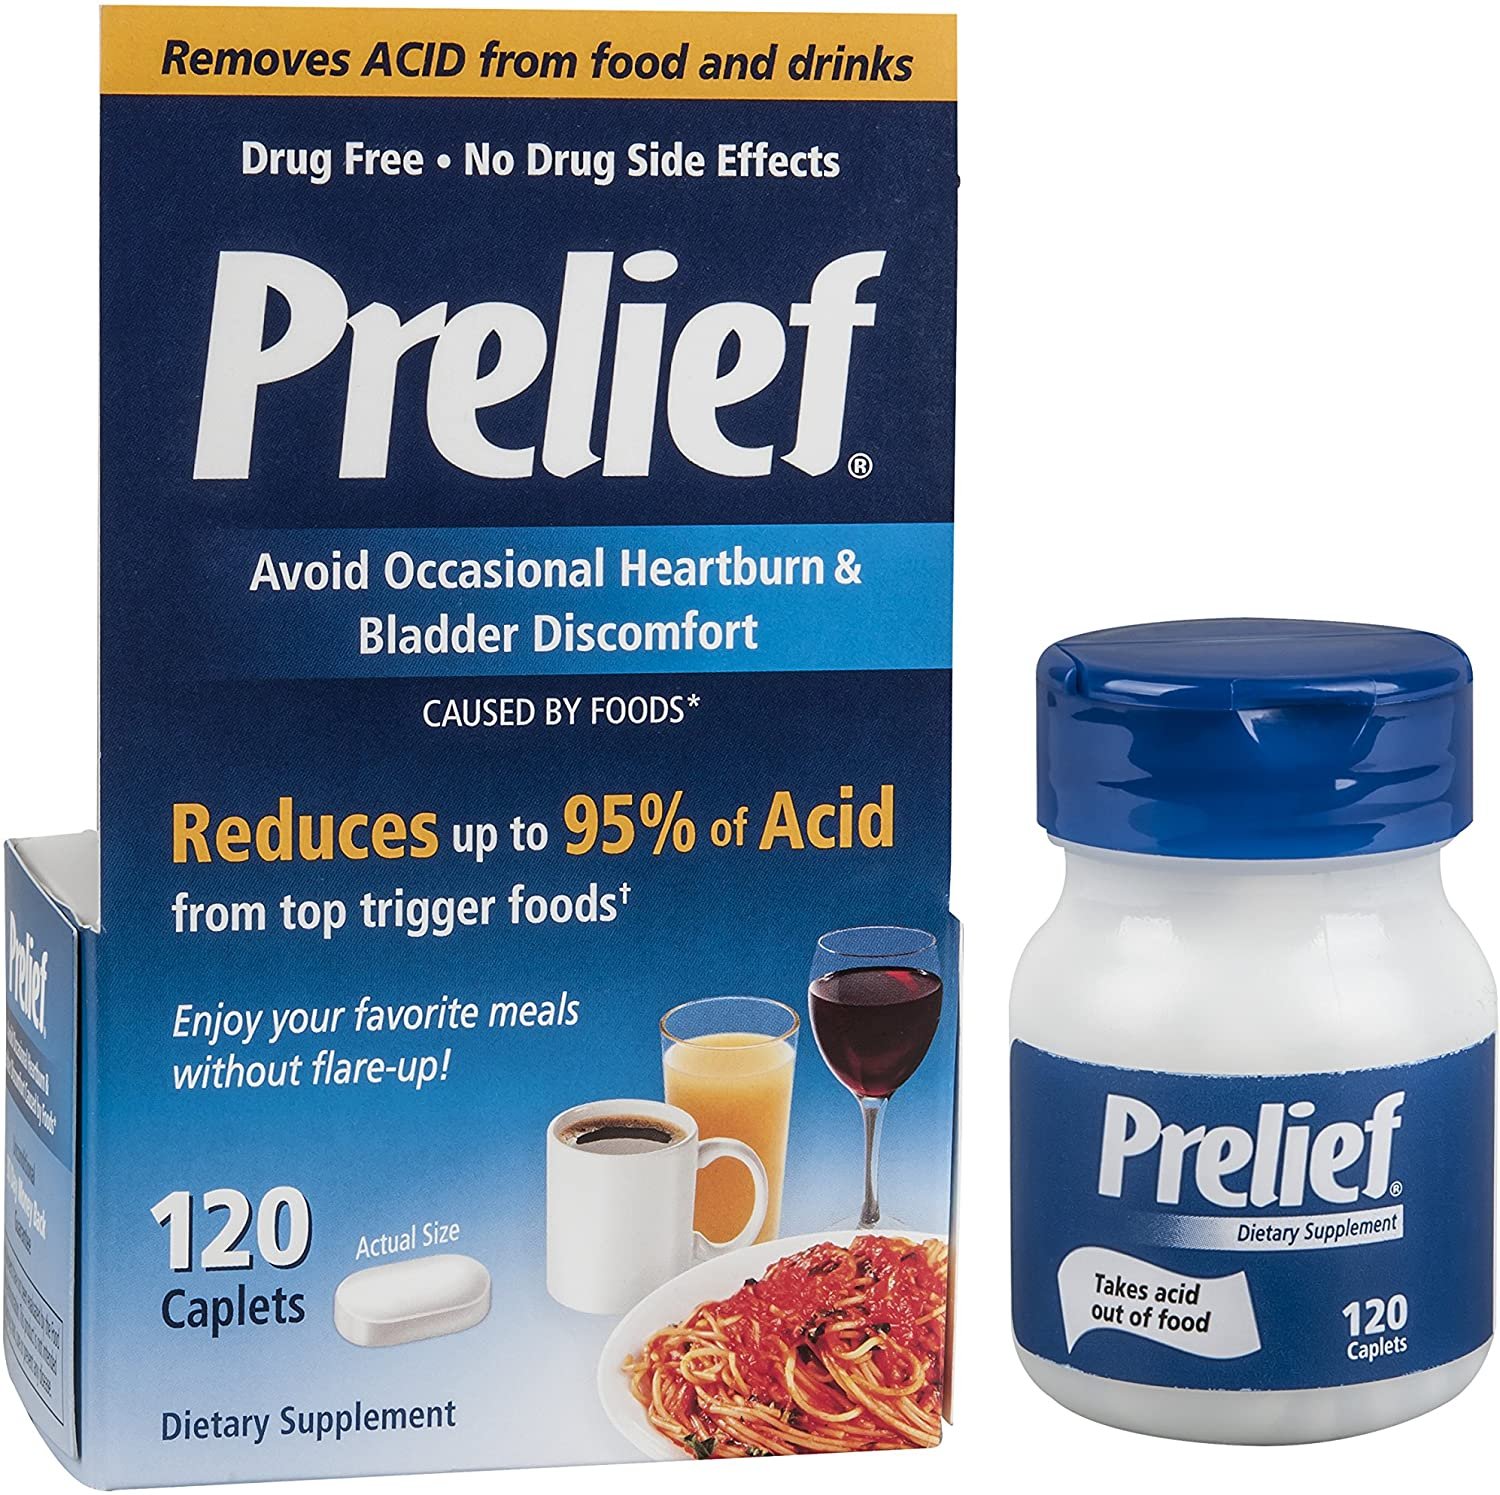 Prelief Dietary Supplement - 120 tablets Pack of 4 - image 4 of 7